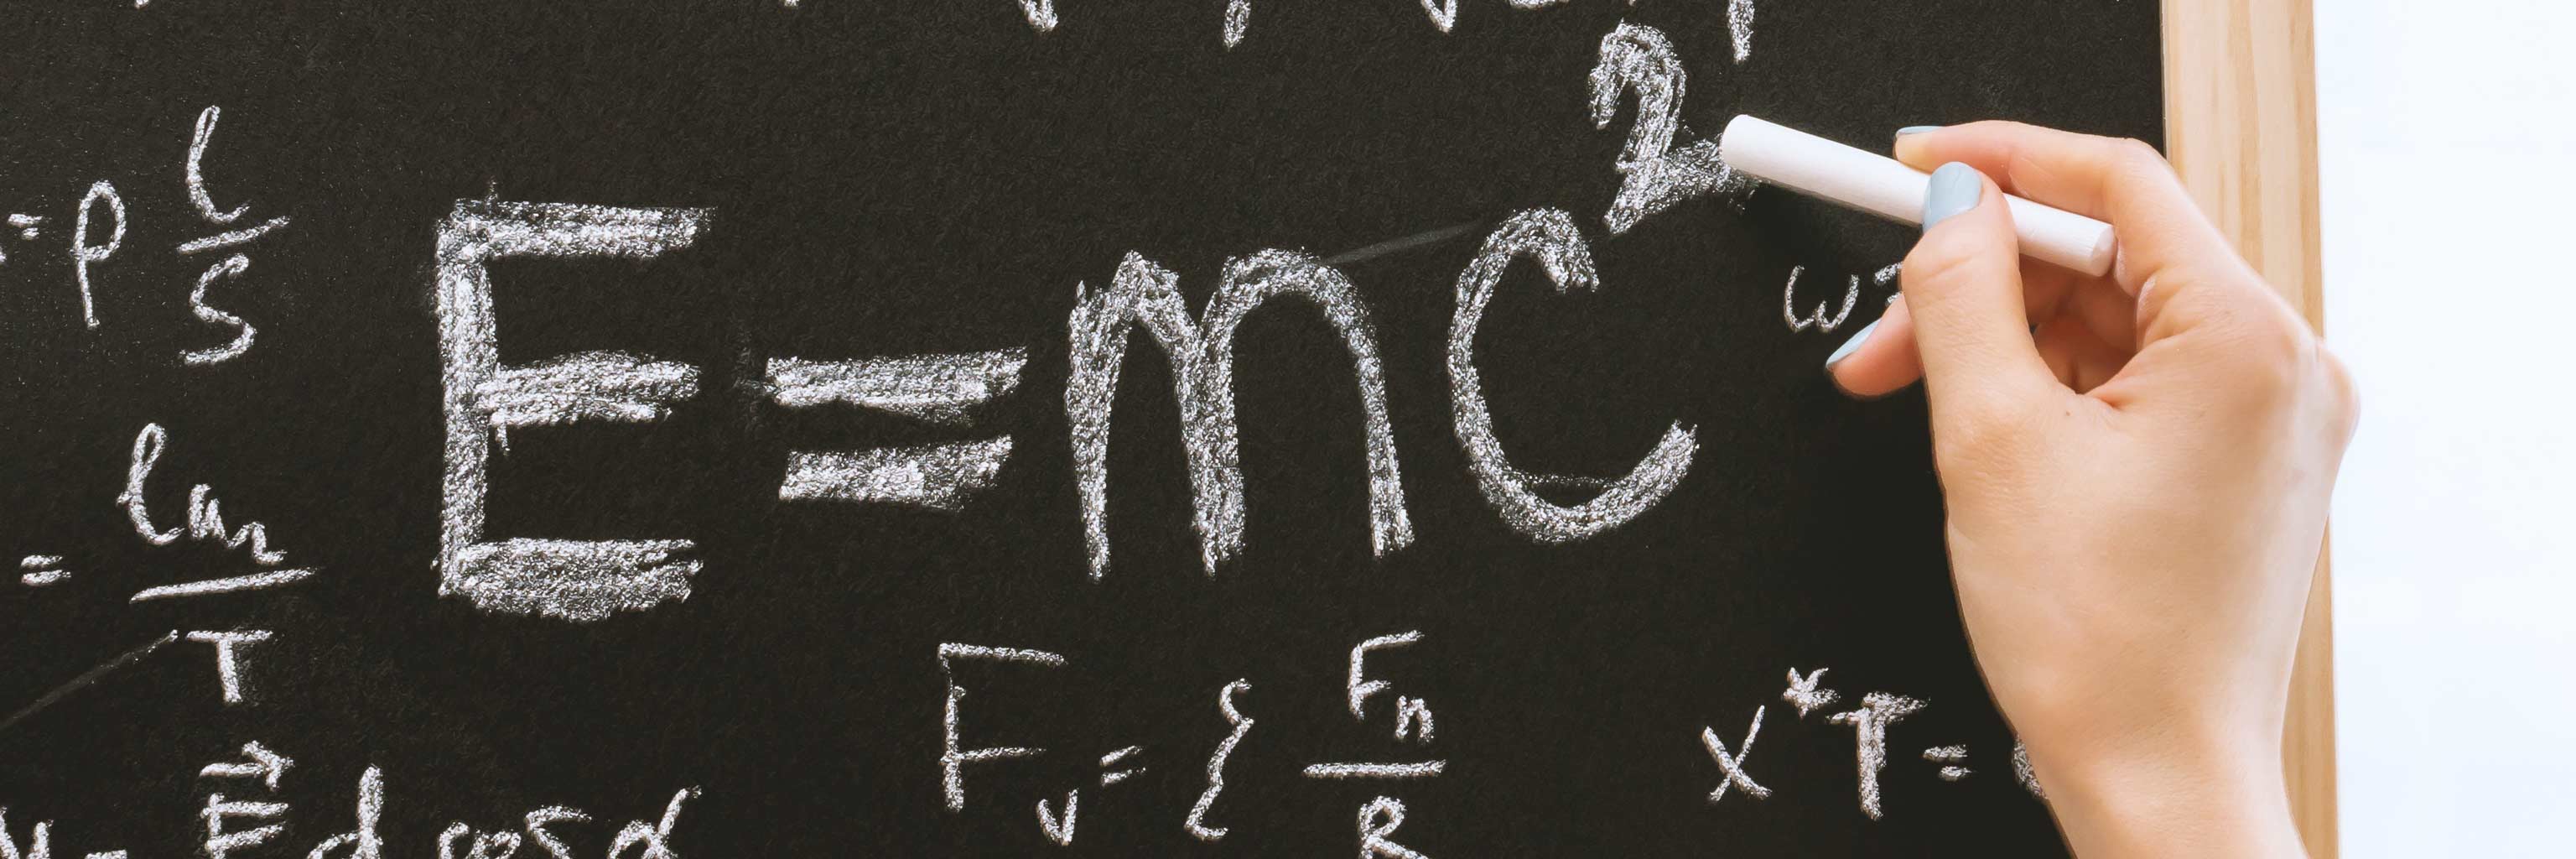 The formula for mass-energy equivalence written on a chalkboard.